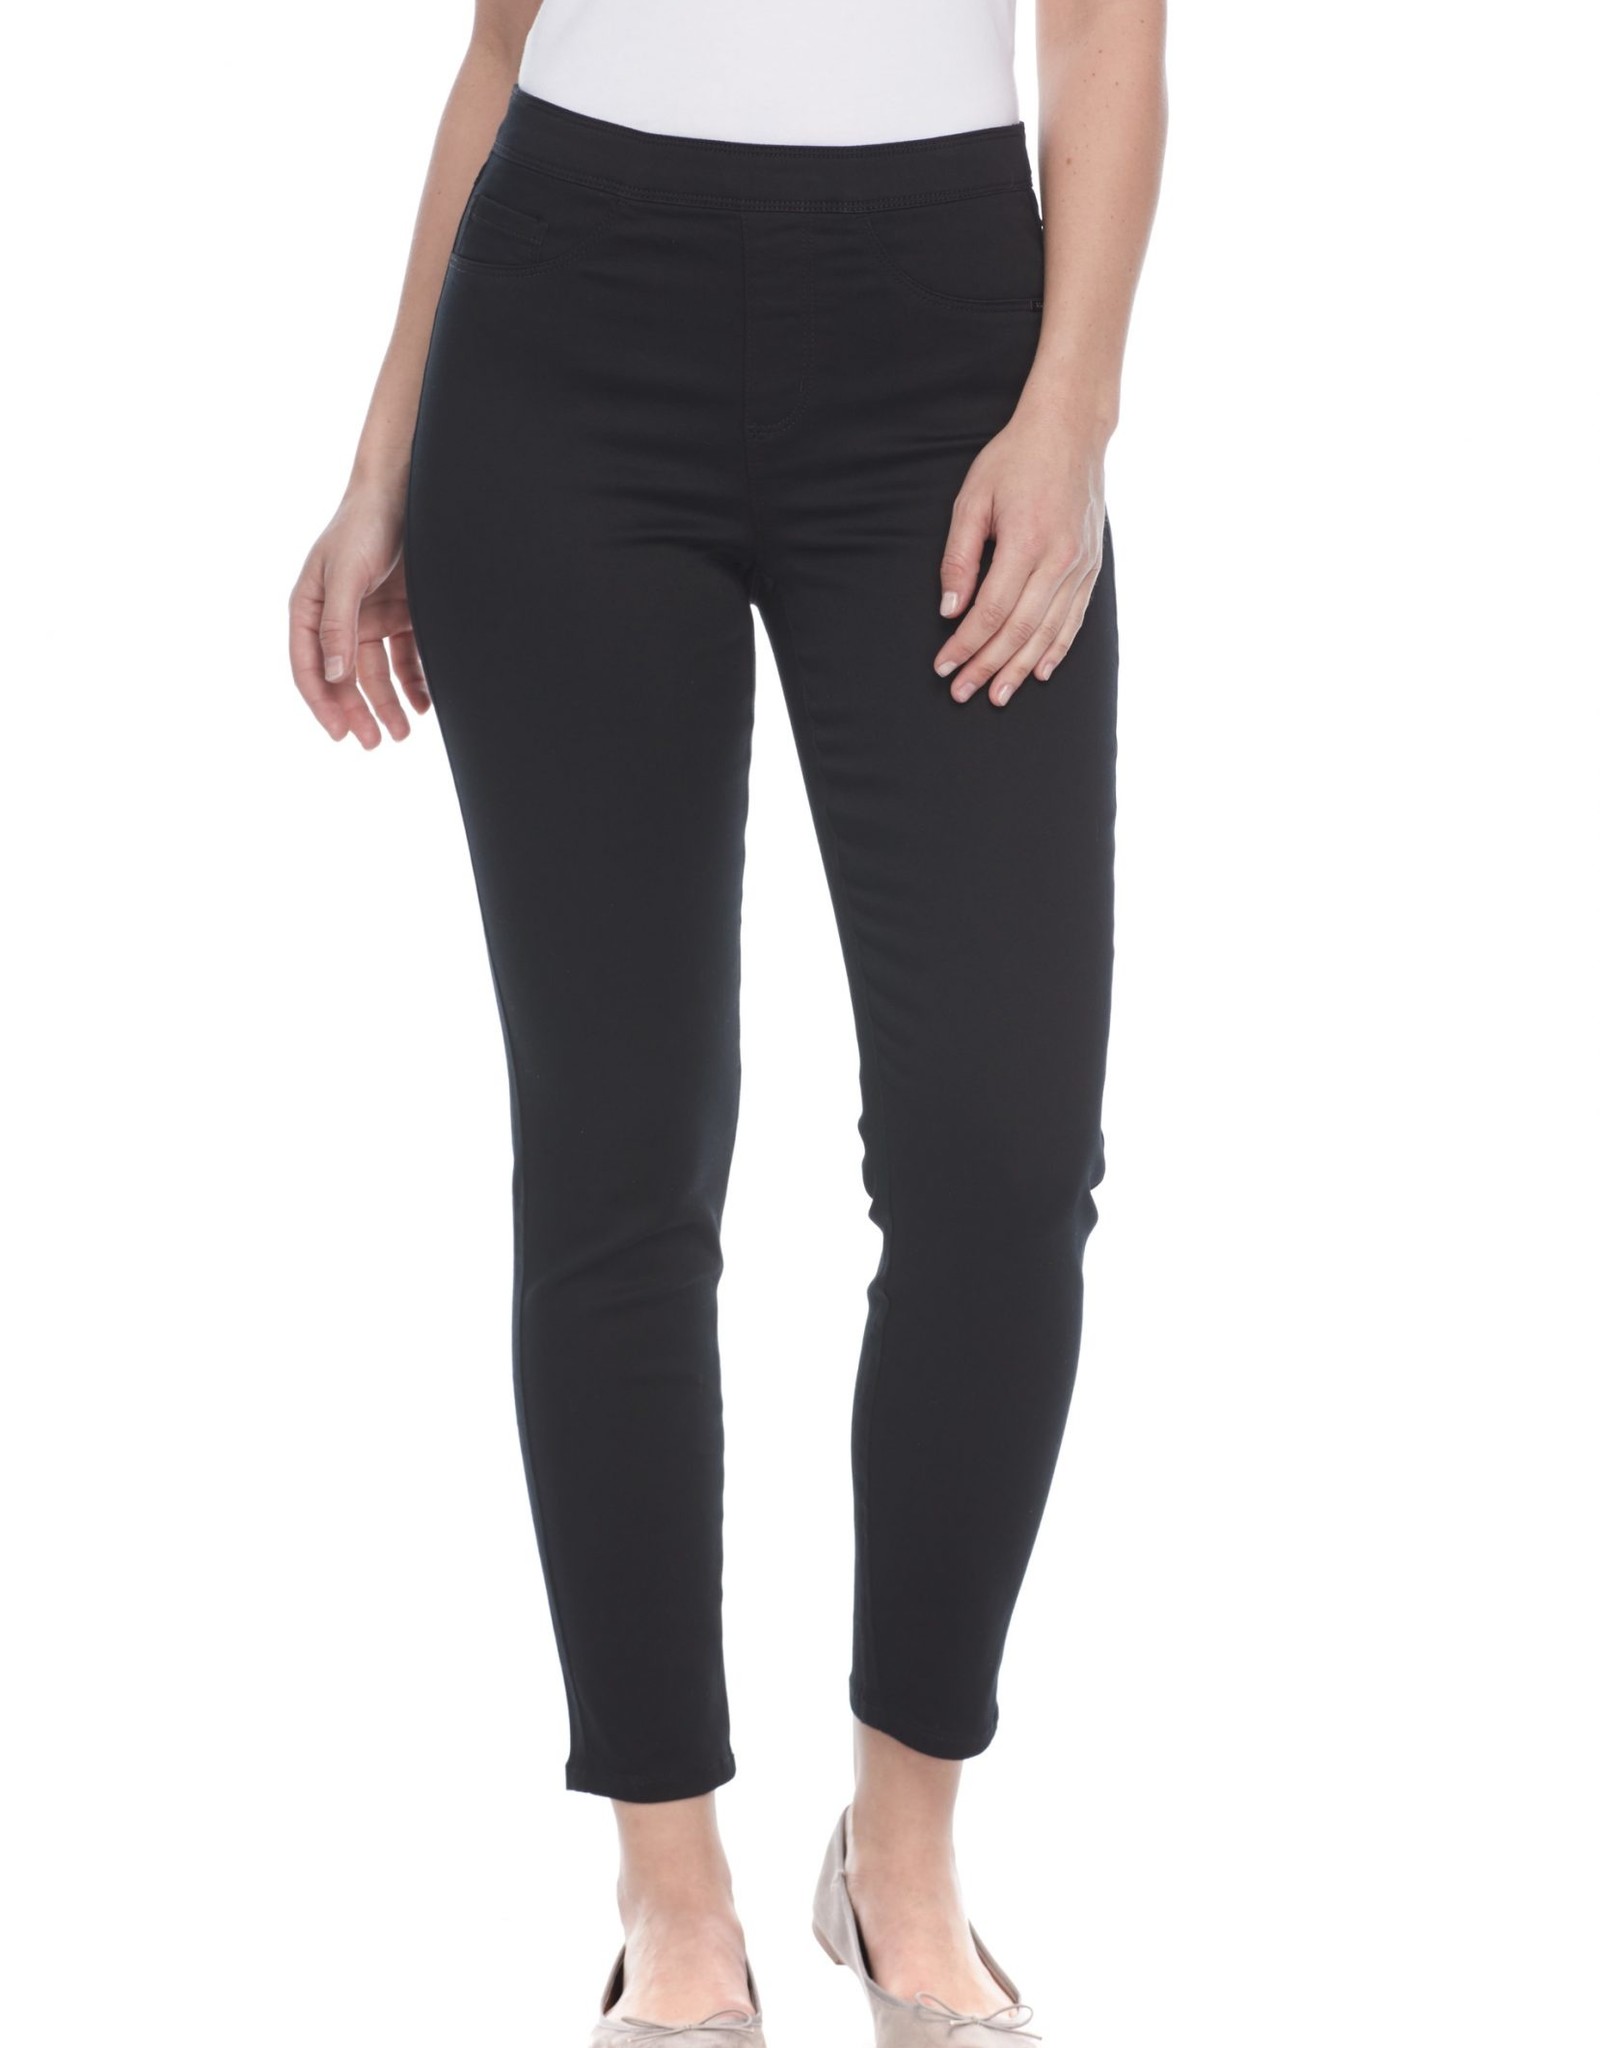 French Dressing Jeans FDJ Pull On Ankle Pant 273906N